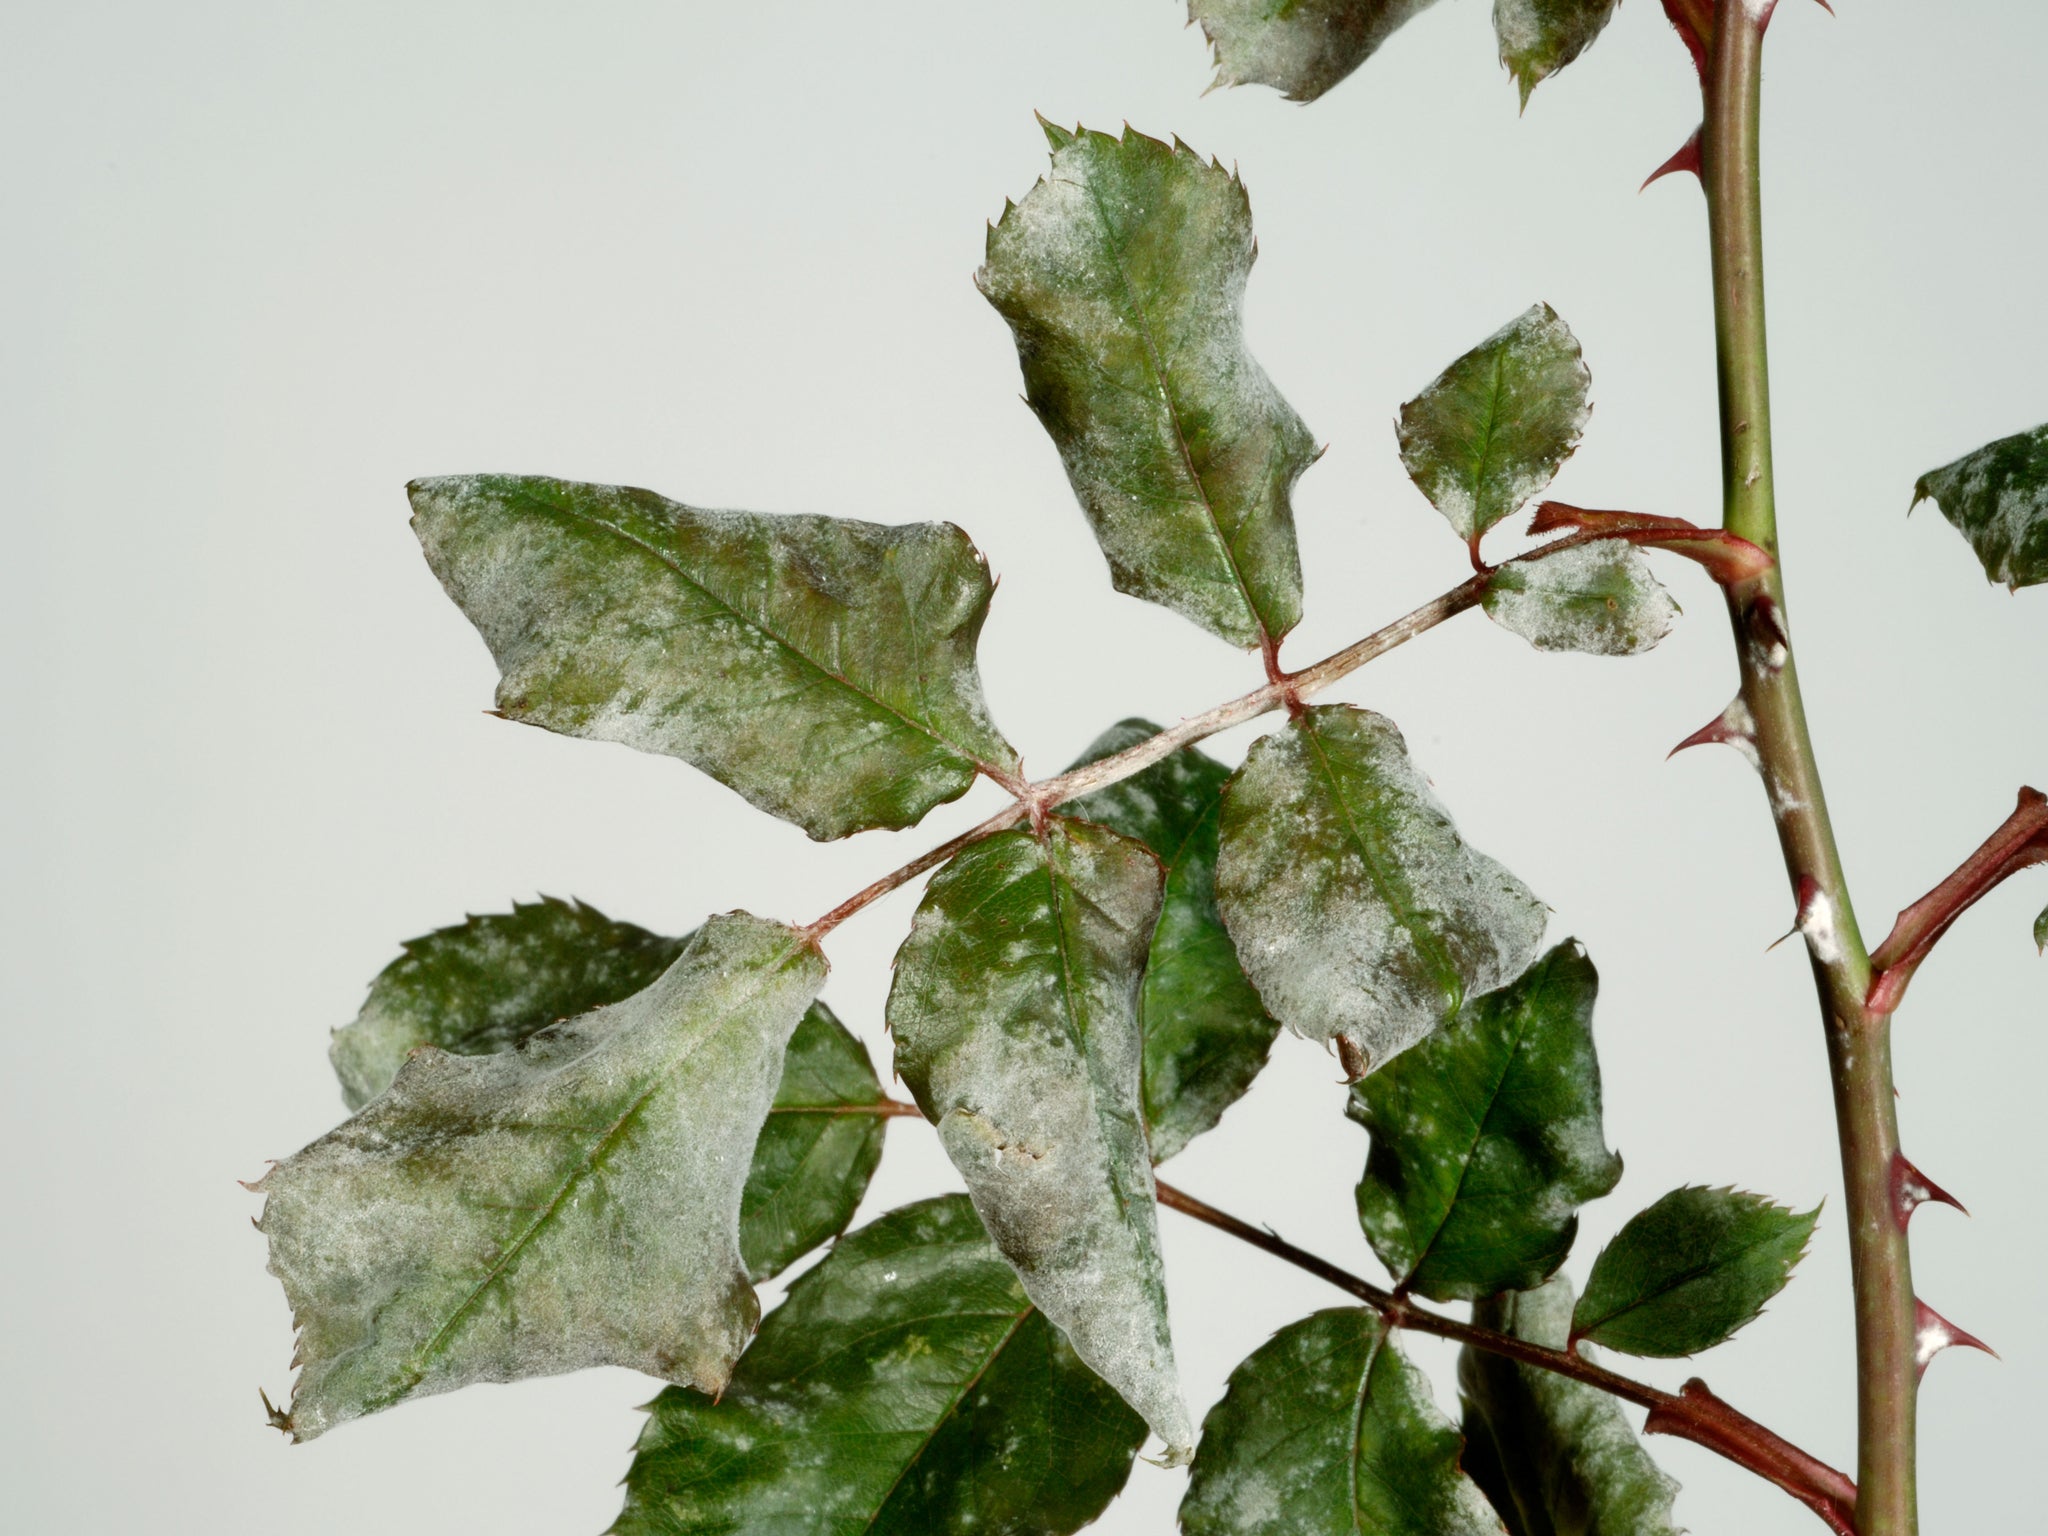 Downy mildew proliferates in damp conditions, on wet foliage with too little air moving round it.